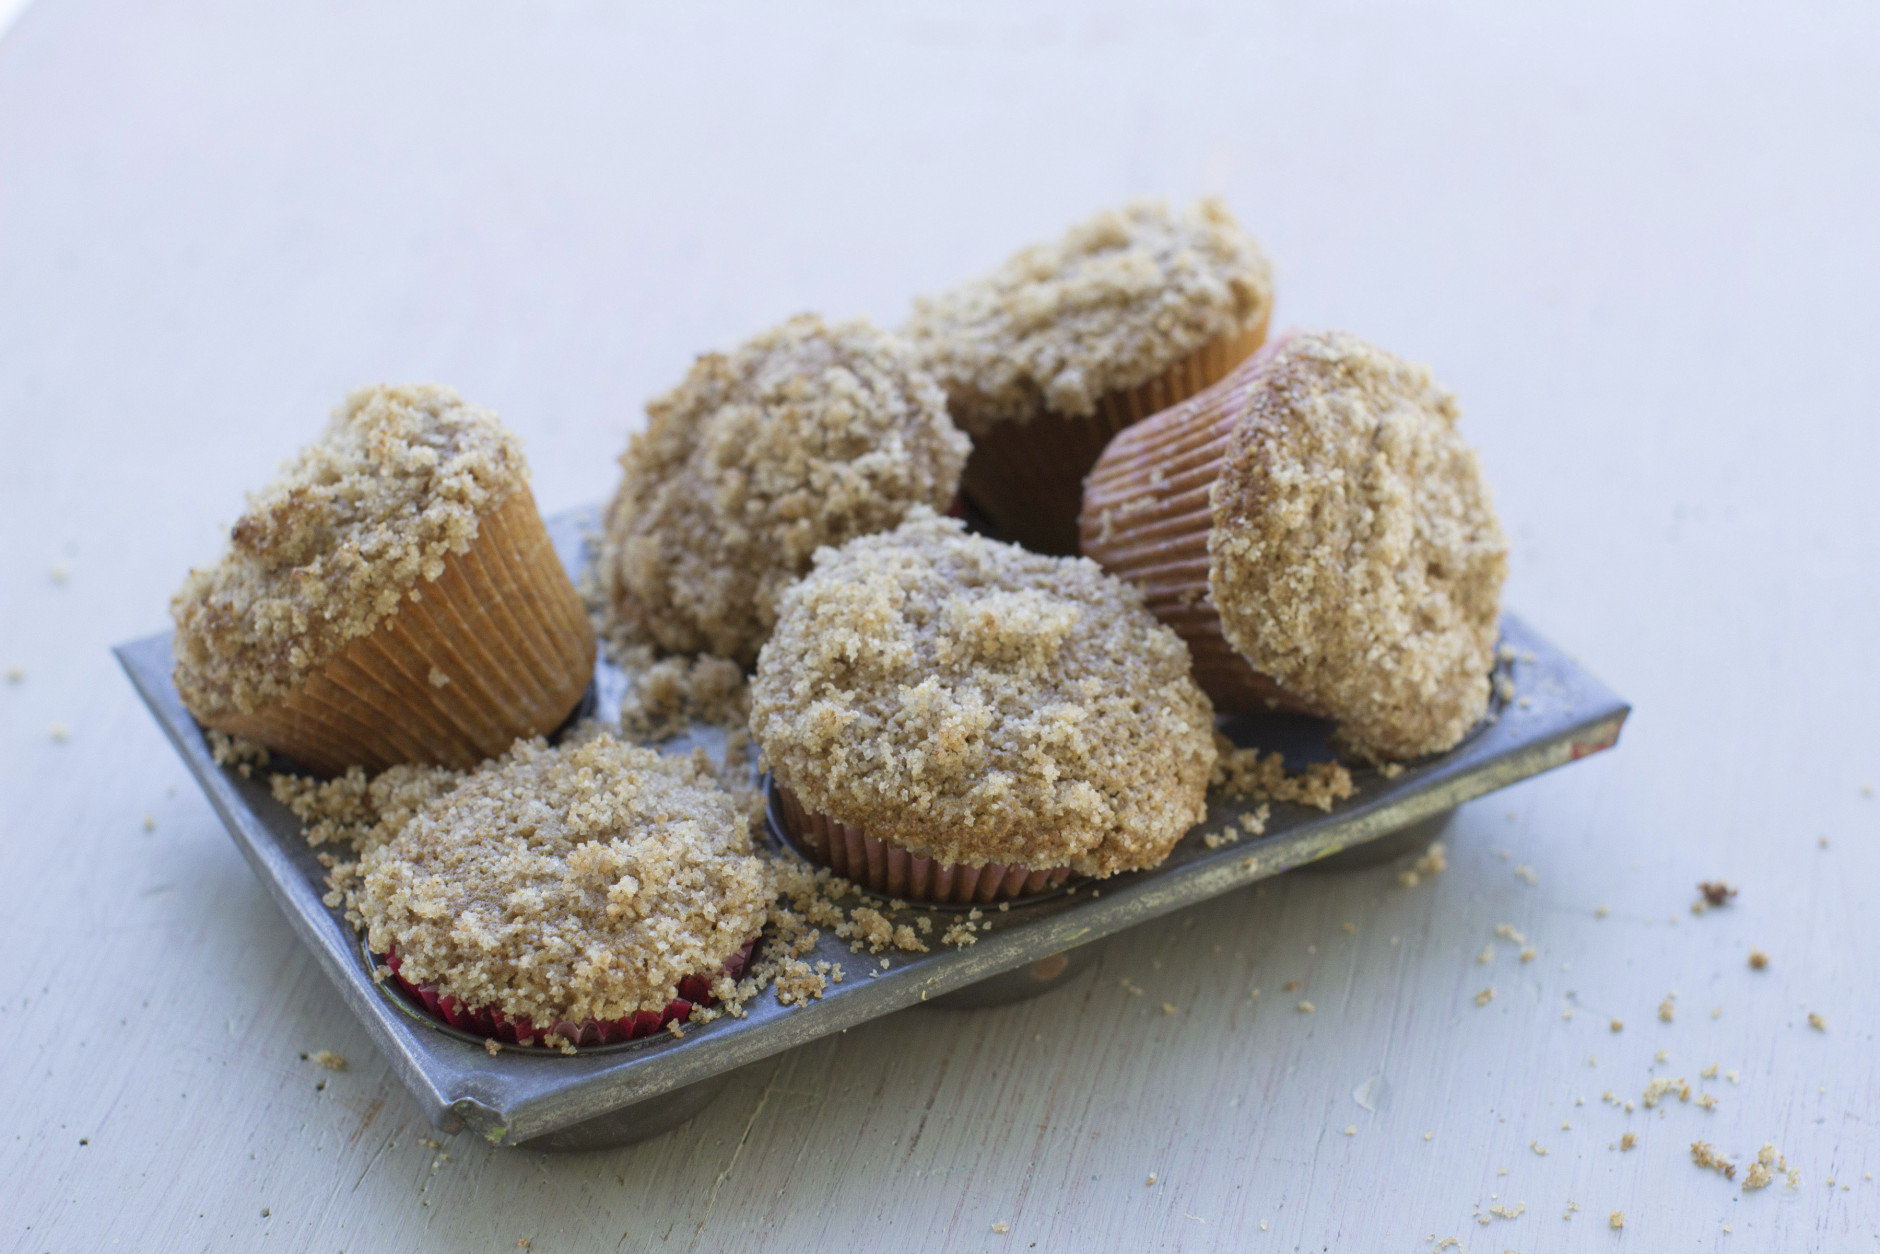 This Sept. 8, 2014 photo shows sprouted wheat muffins with steusel topping in Concord, N.H. Peter Reinhart's new book, "Bread Revolution" dives into the rising trends of sprouted and whole grains, as well as heirloom flours. (AP Photo/Matthew Mead)